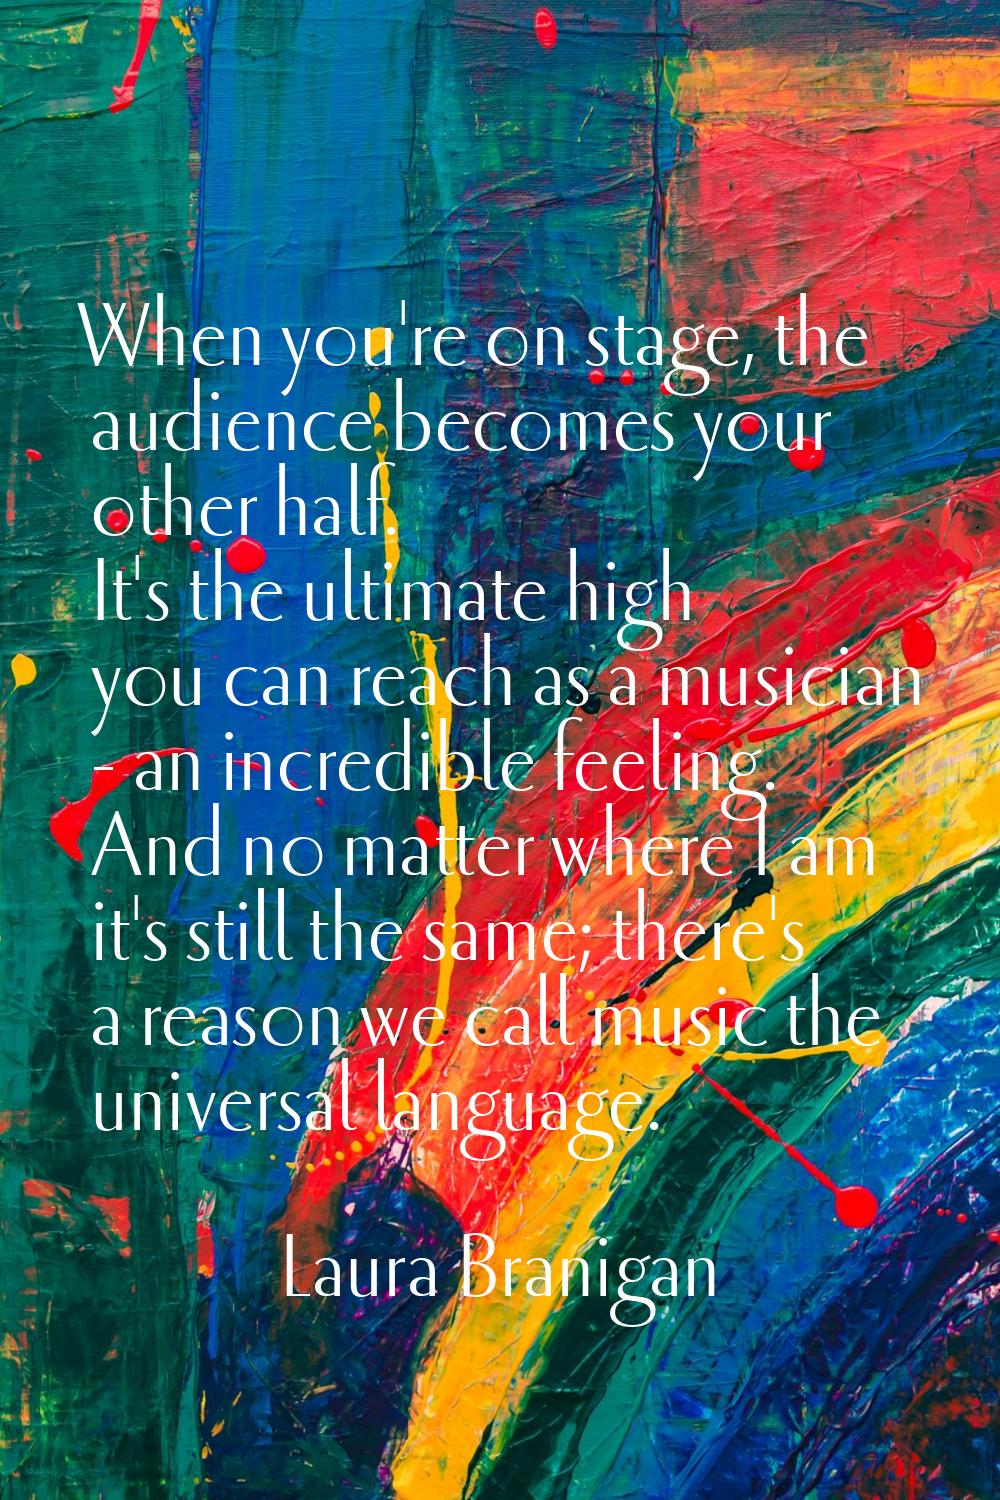 When you're on stage, the audience becomes your other half. It's the ultimate high you can reach as